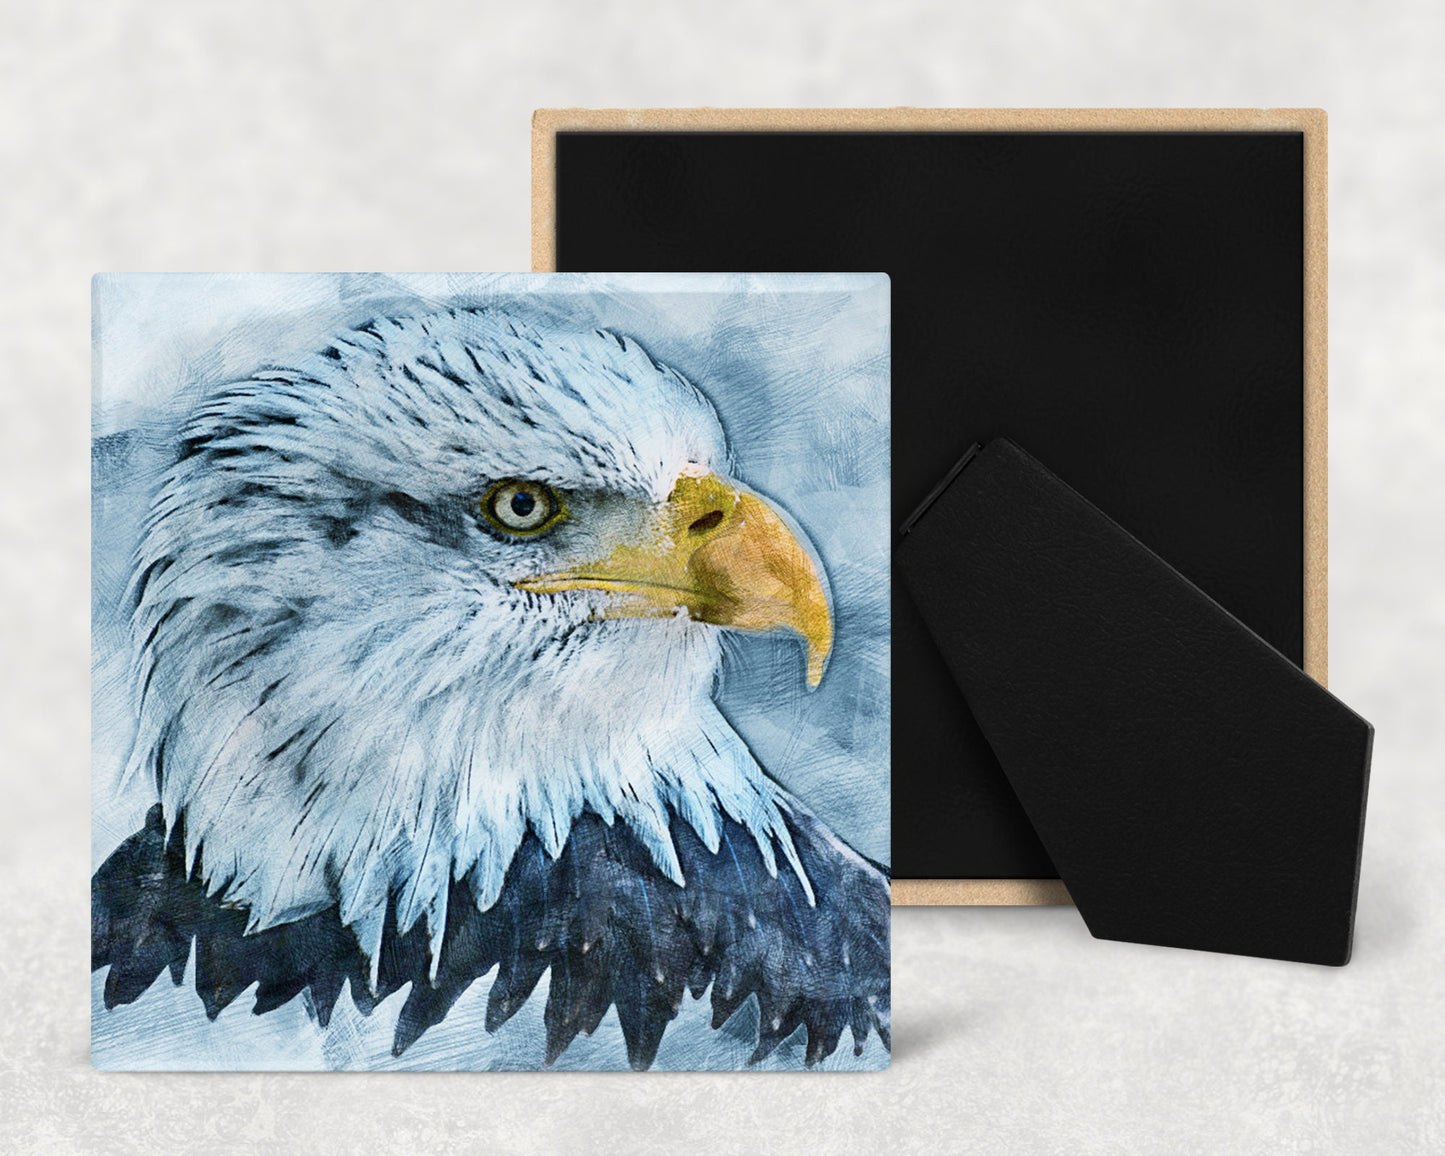 Bald Eagle Grunge Portrait Art Decorative Ceramic Tile with Optional Easel Back - Available in 3 Sizes